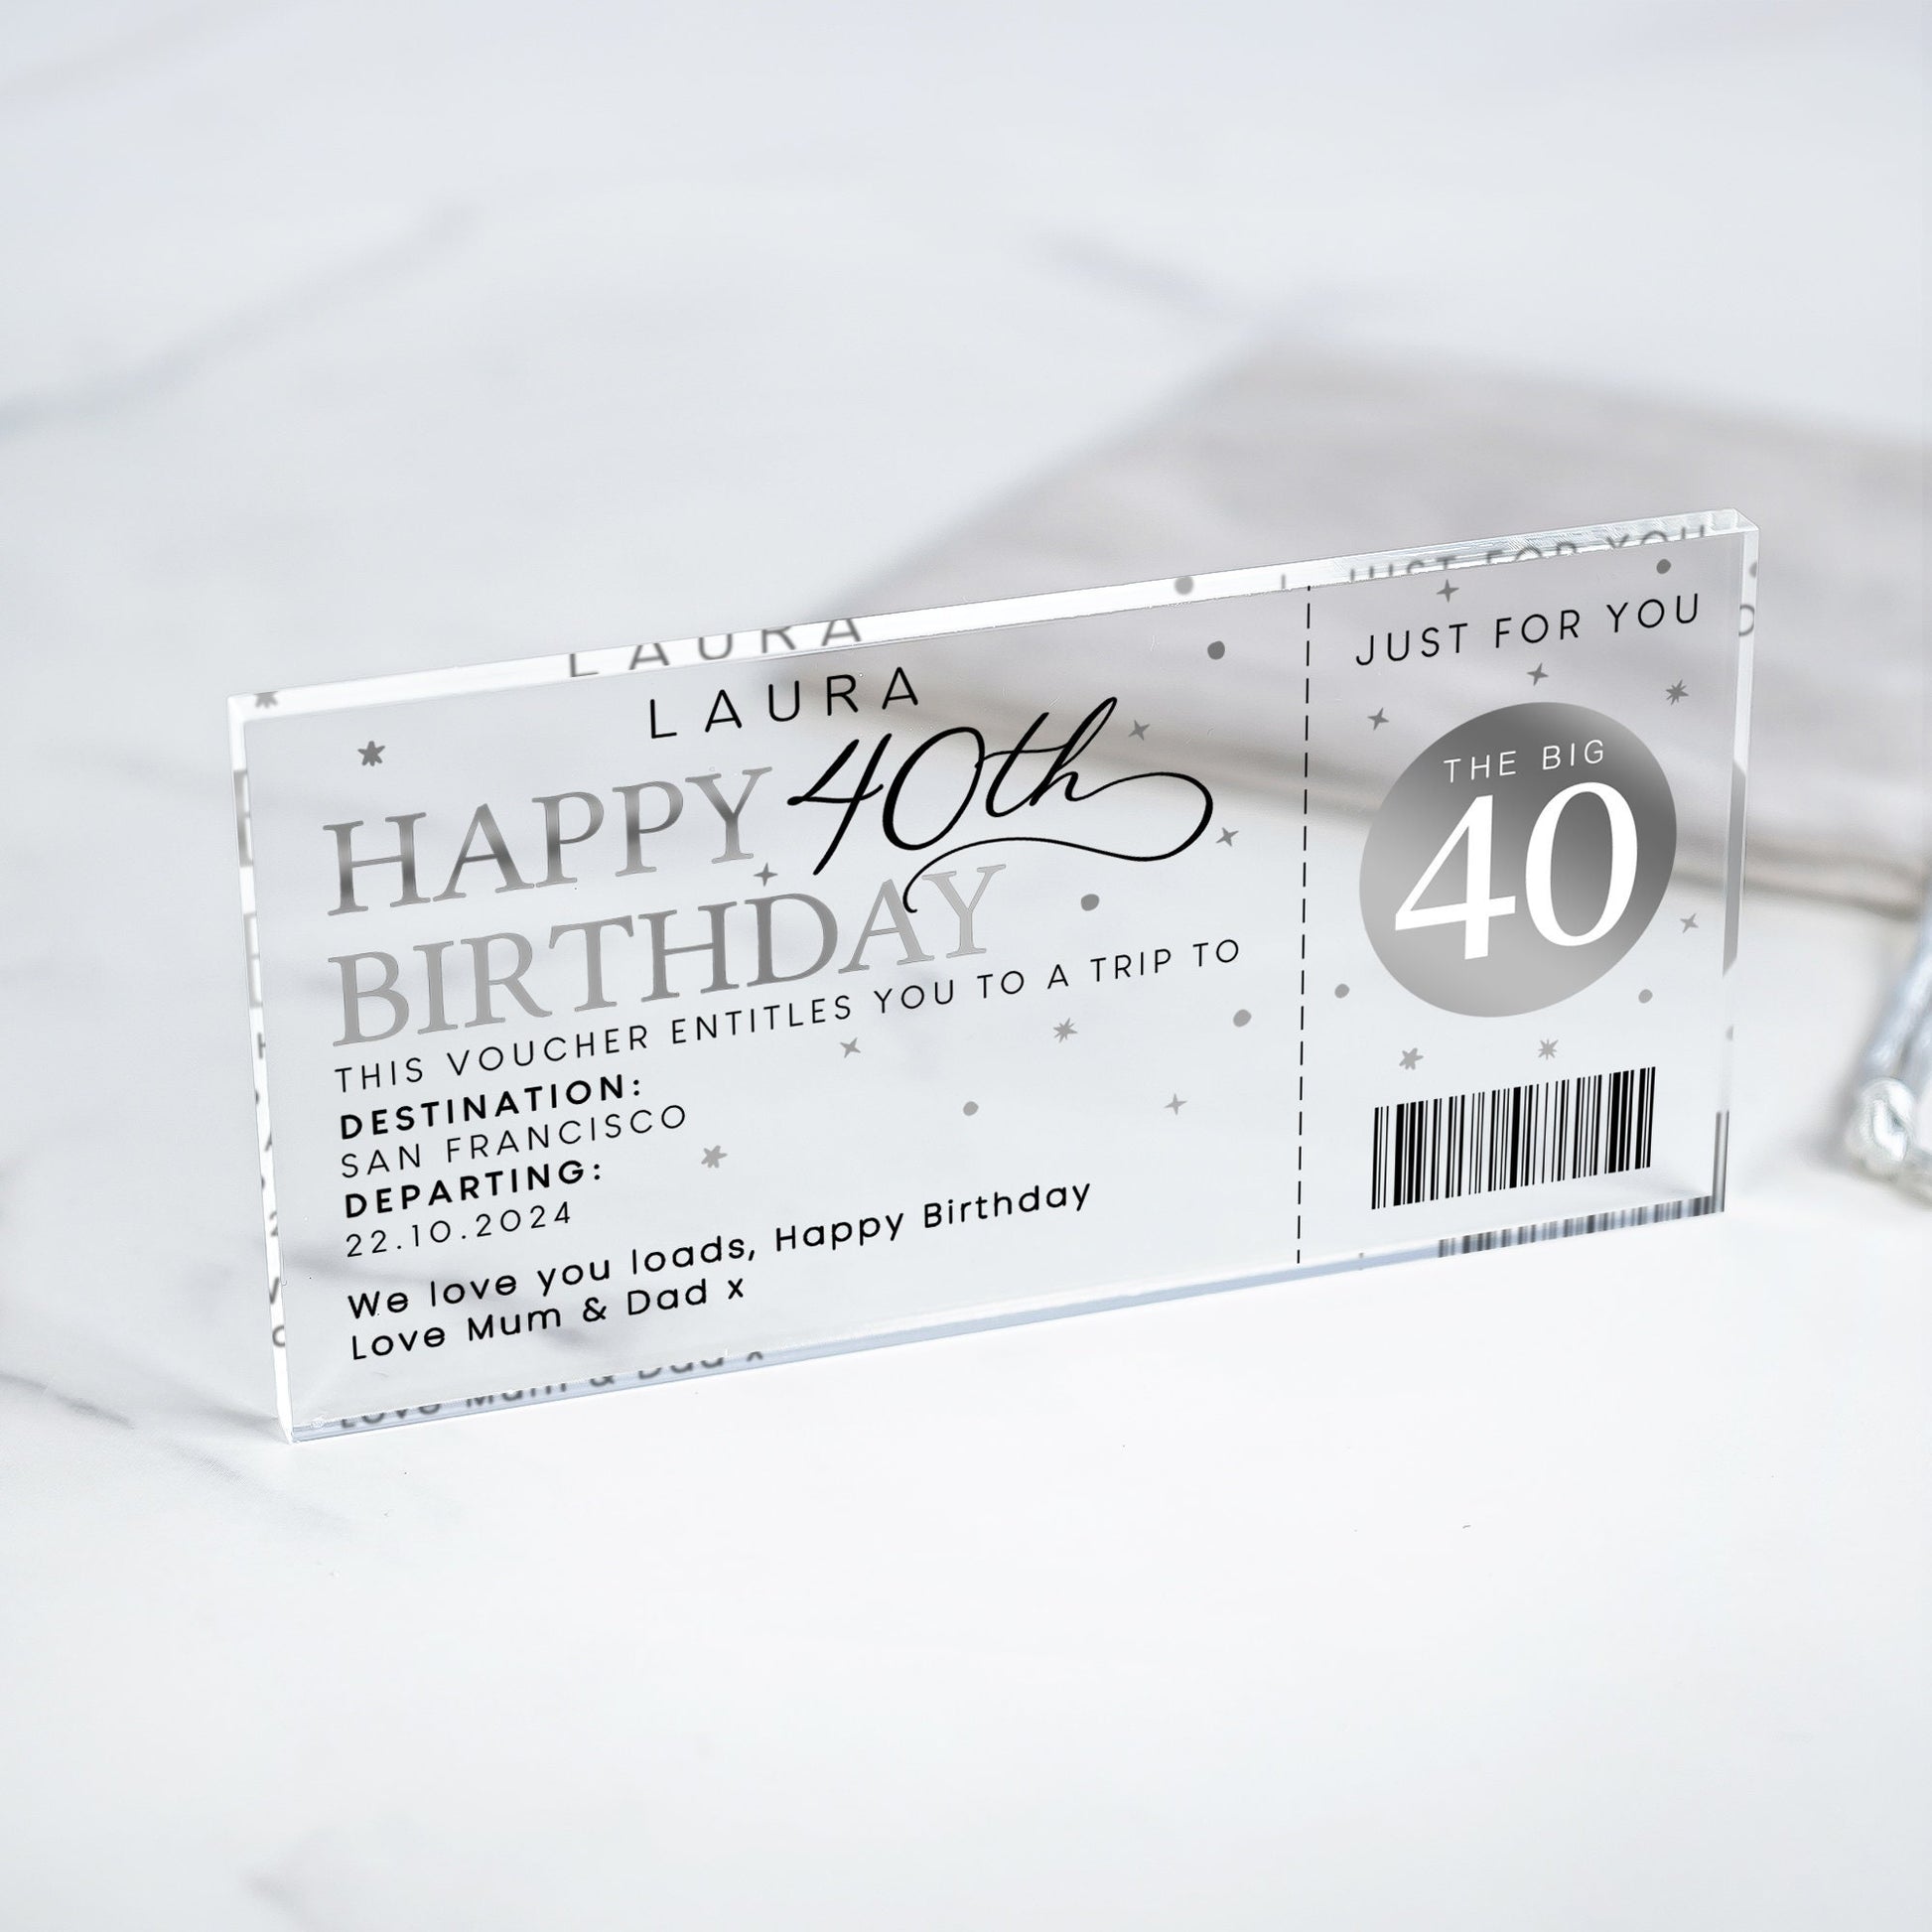 Personalised Birthday Holiday Reveal Ticket, 30th Surpise Gift, 18th, 21st, 30th, 40th, 50th, Surprise Reveal Plaque, Birthday Gift Reveal